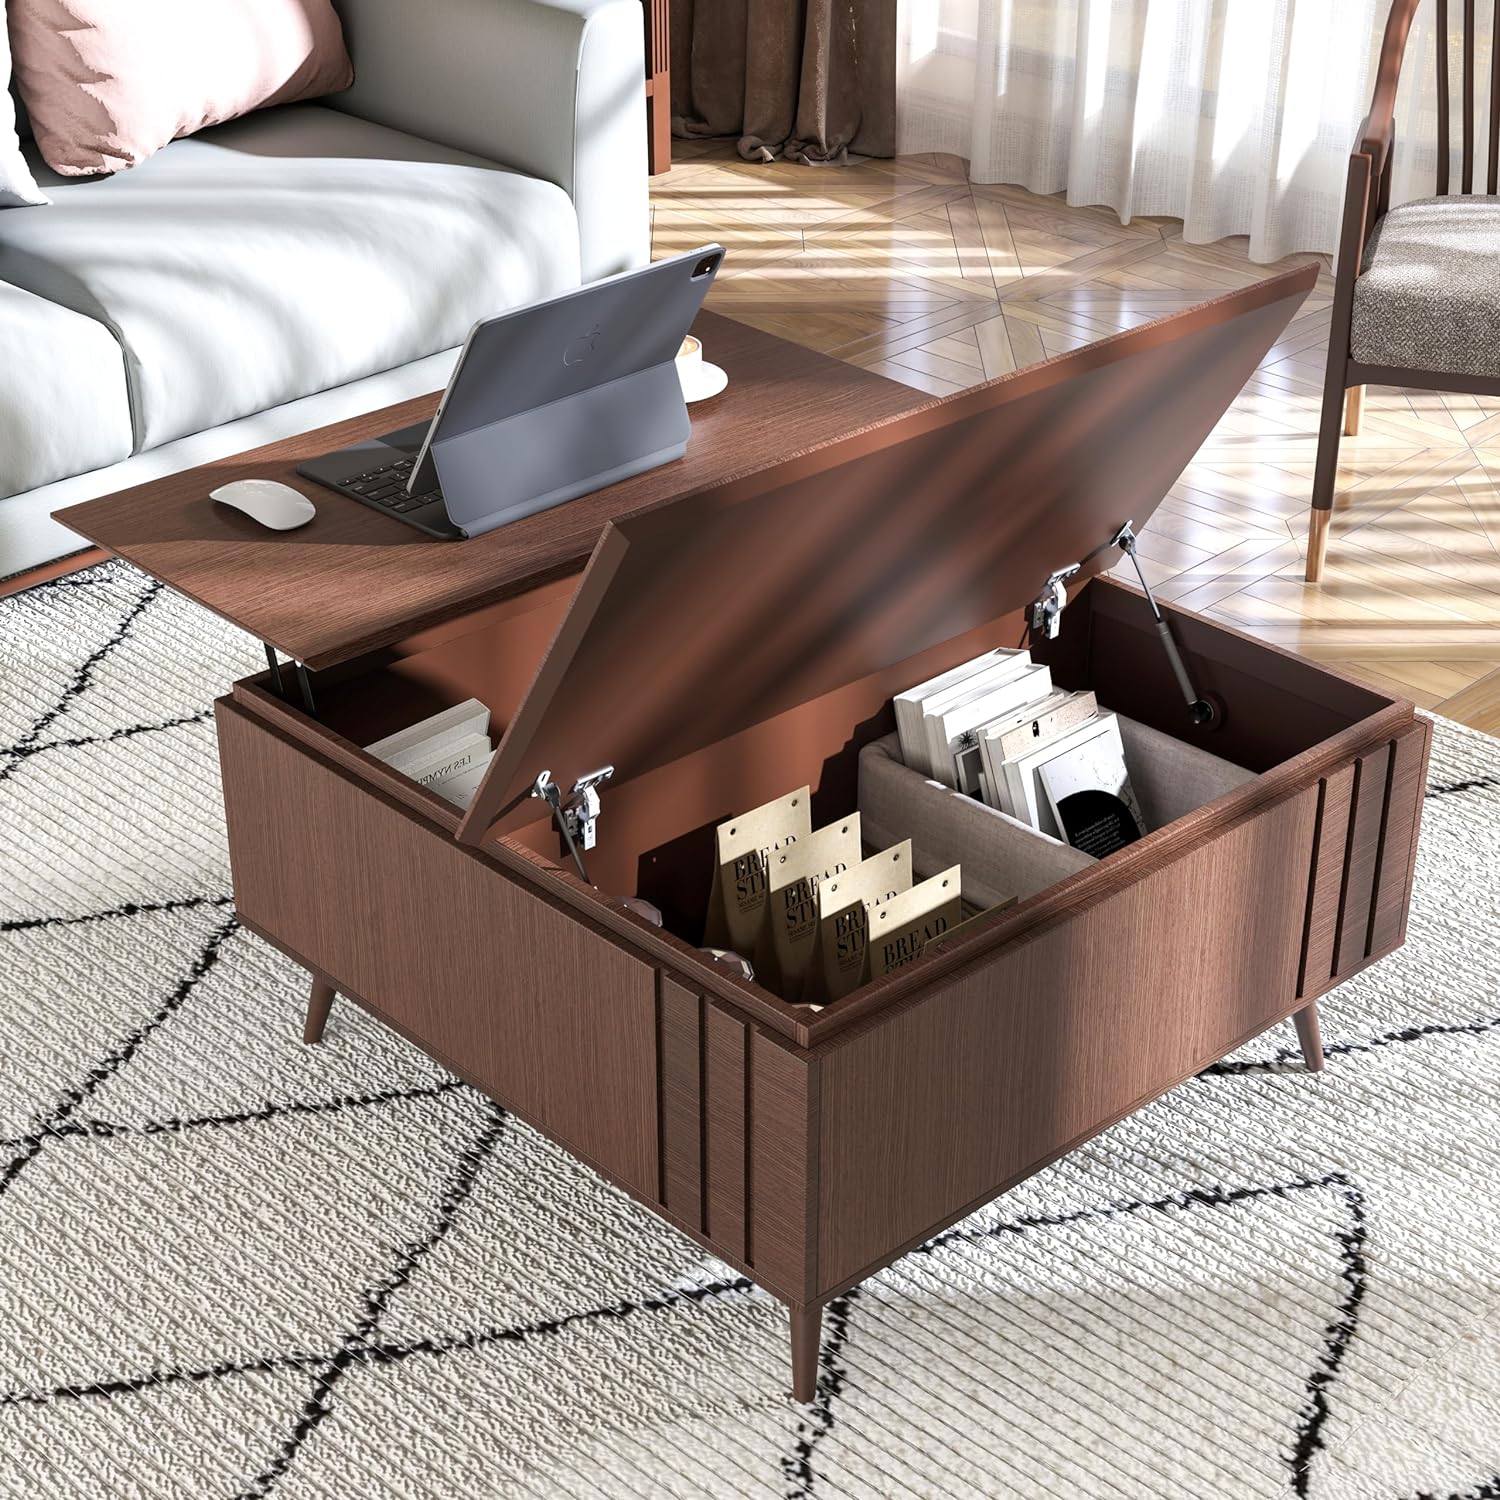 Lift Top Coffee Table with Storage,Mid-Century Modern,Plenty of Storage Space,Multi-Functional Table for Living Room,Convenient for Eating,Gaming,or Working on Computer